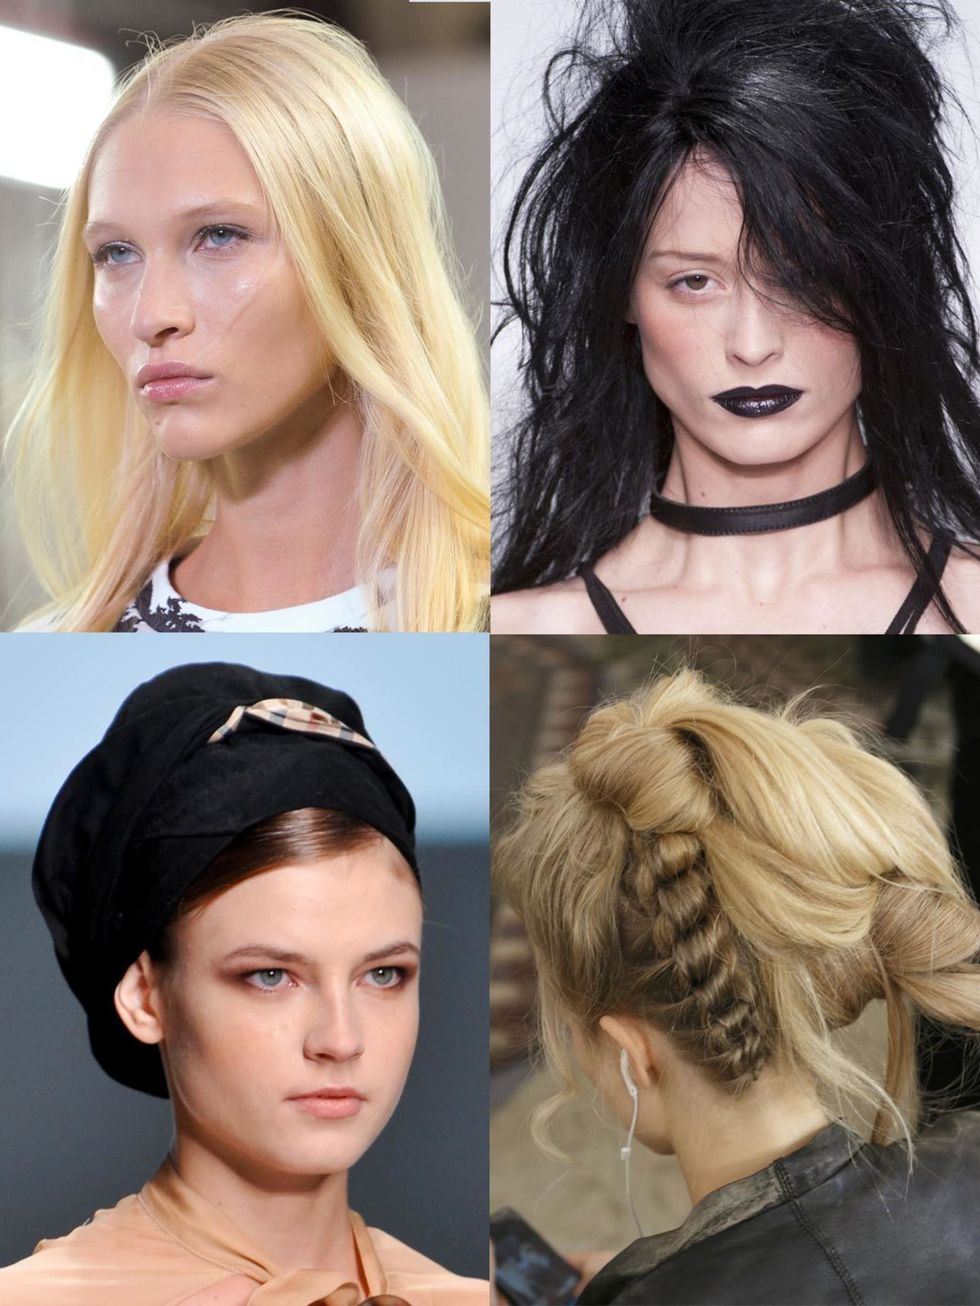 &lt;p&gt;From the wonderfully whacky to the easily covetable, London&rsquo;s &lt;a href=&quot;http://www.elleuk.com/catwalk&quot;&gt;Spring Summer 14 catwalk&lt;/a&gt; featured hair from both ends of the spectrum (and lots in-between); freshly washed is s